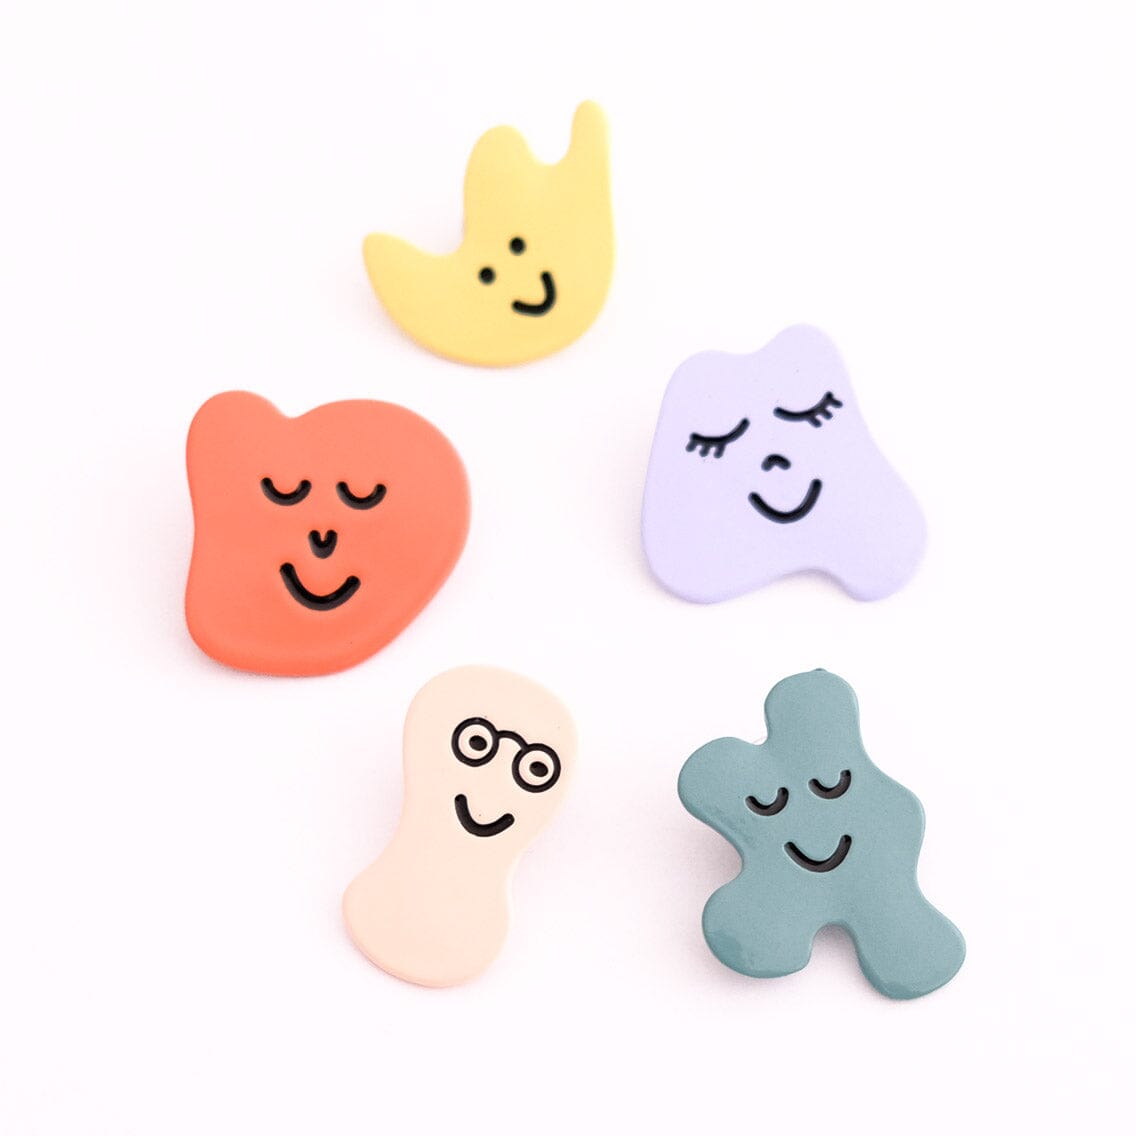 Pin "Happy Shapes" Global Affairs 